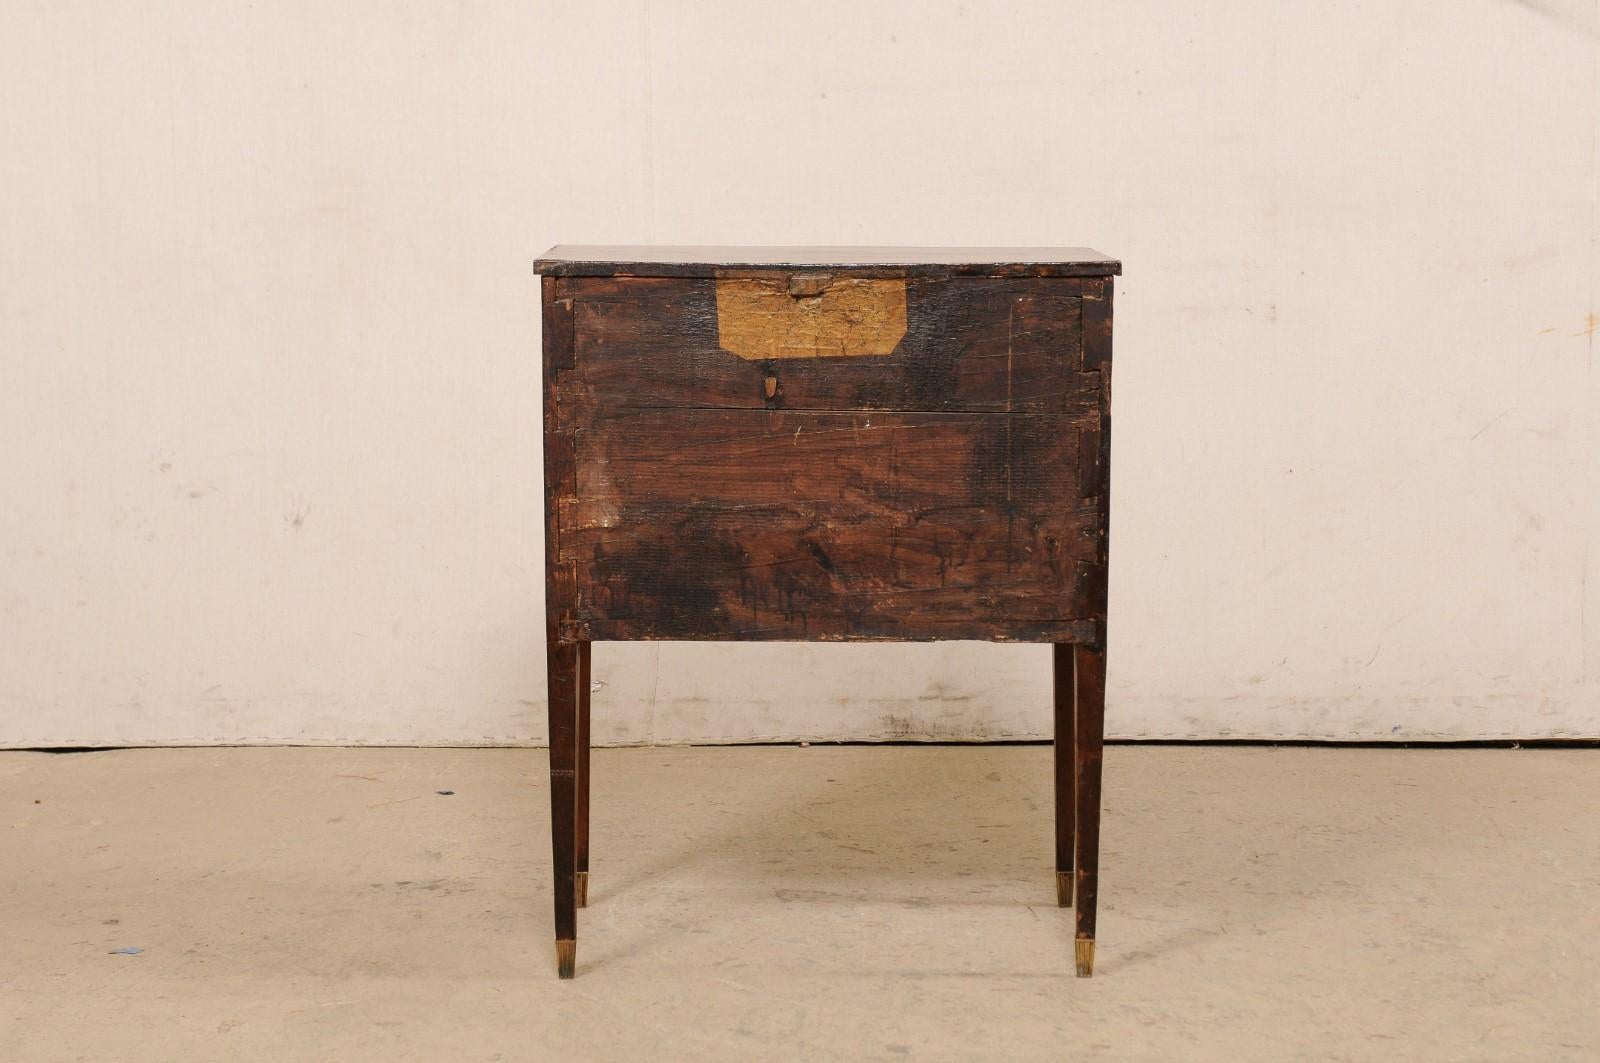 Italian Two-Drawer Wooden Side Chest Adorn w/Stylish Inlay Banding, 19th Century For Sale 4